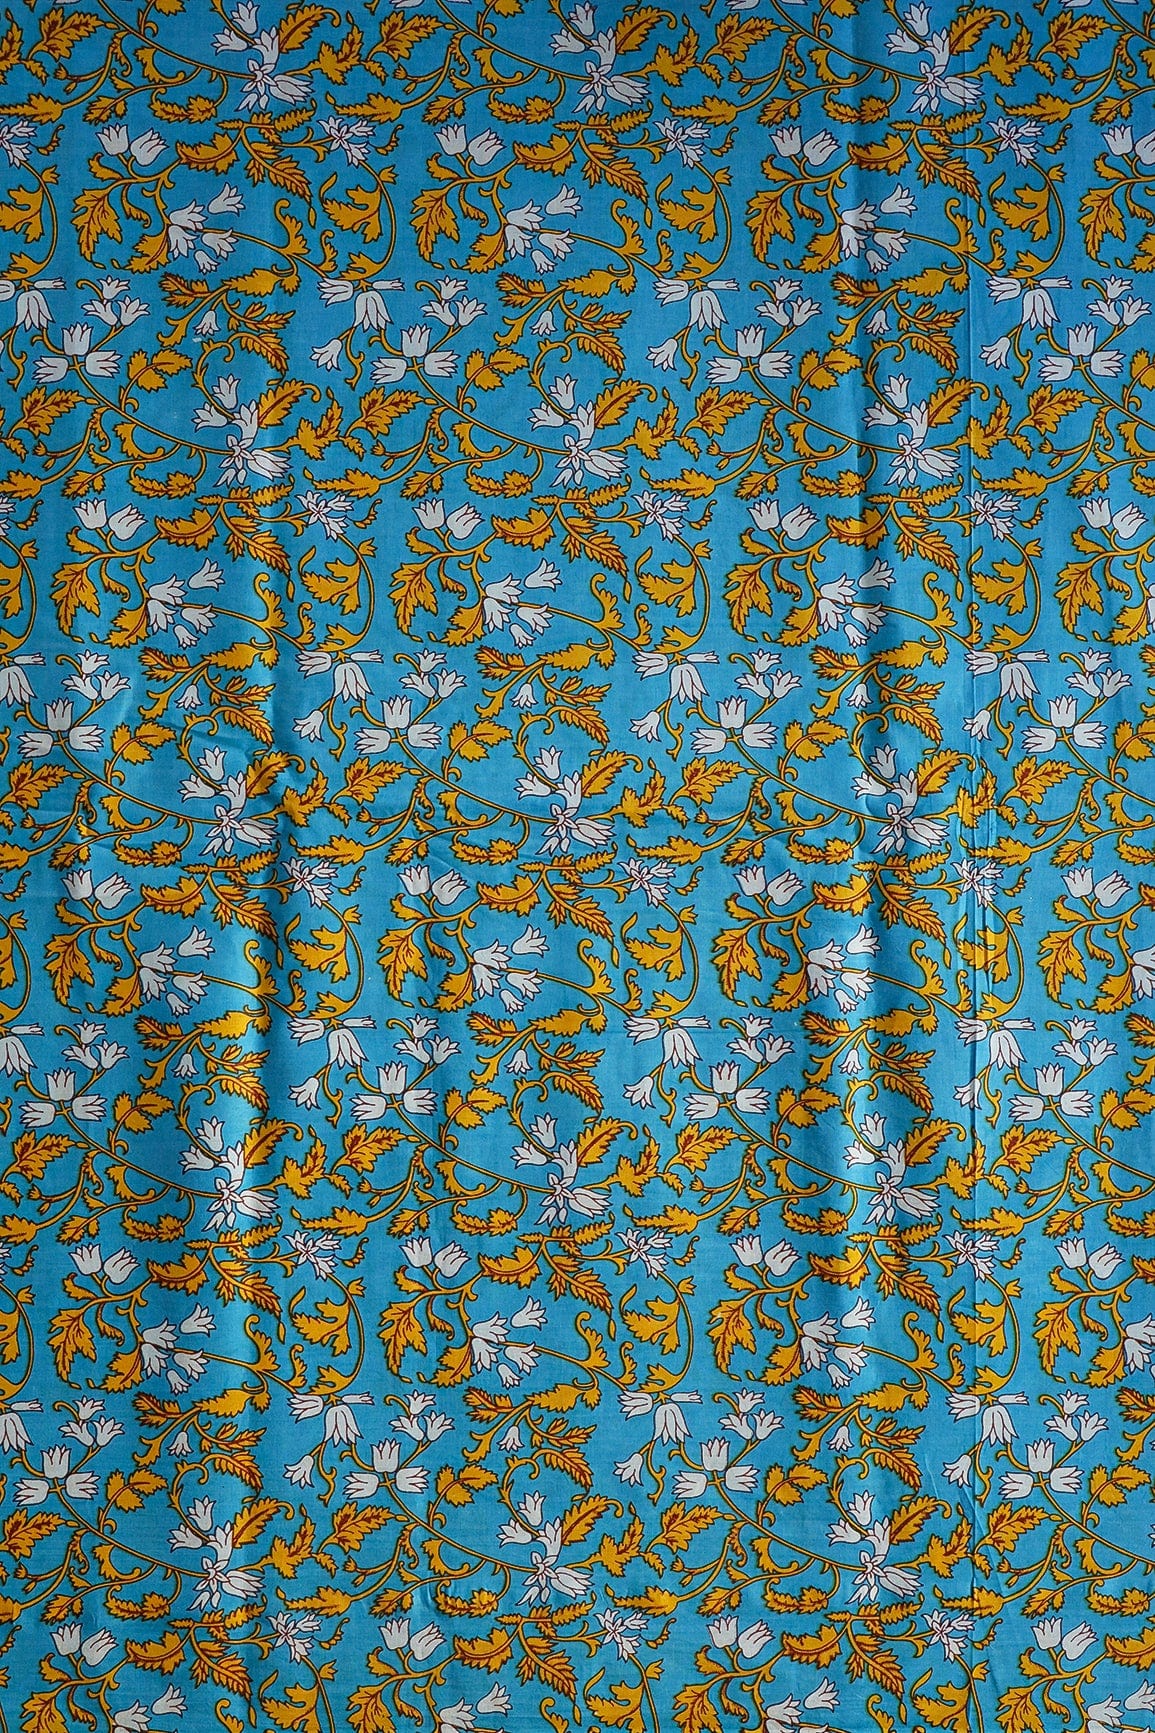 doeraa Prints Yellow And White Floral Print On Blue Pure Cotton Fabric